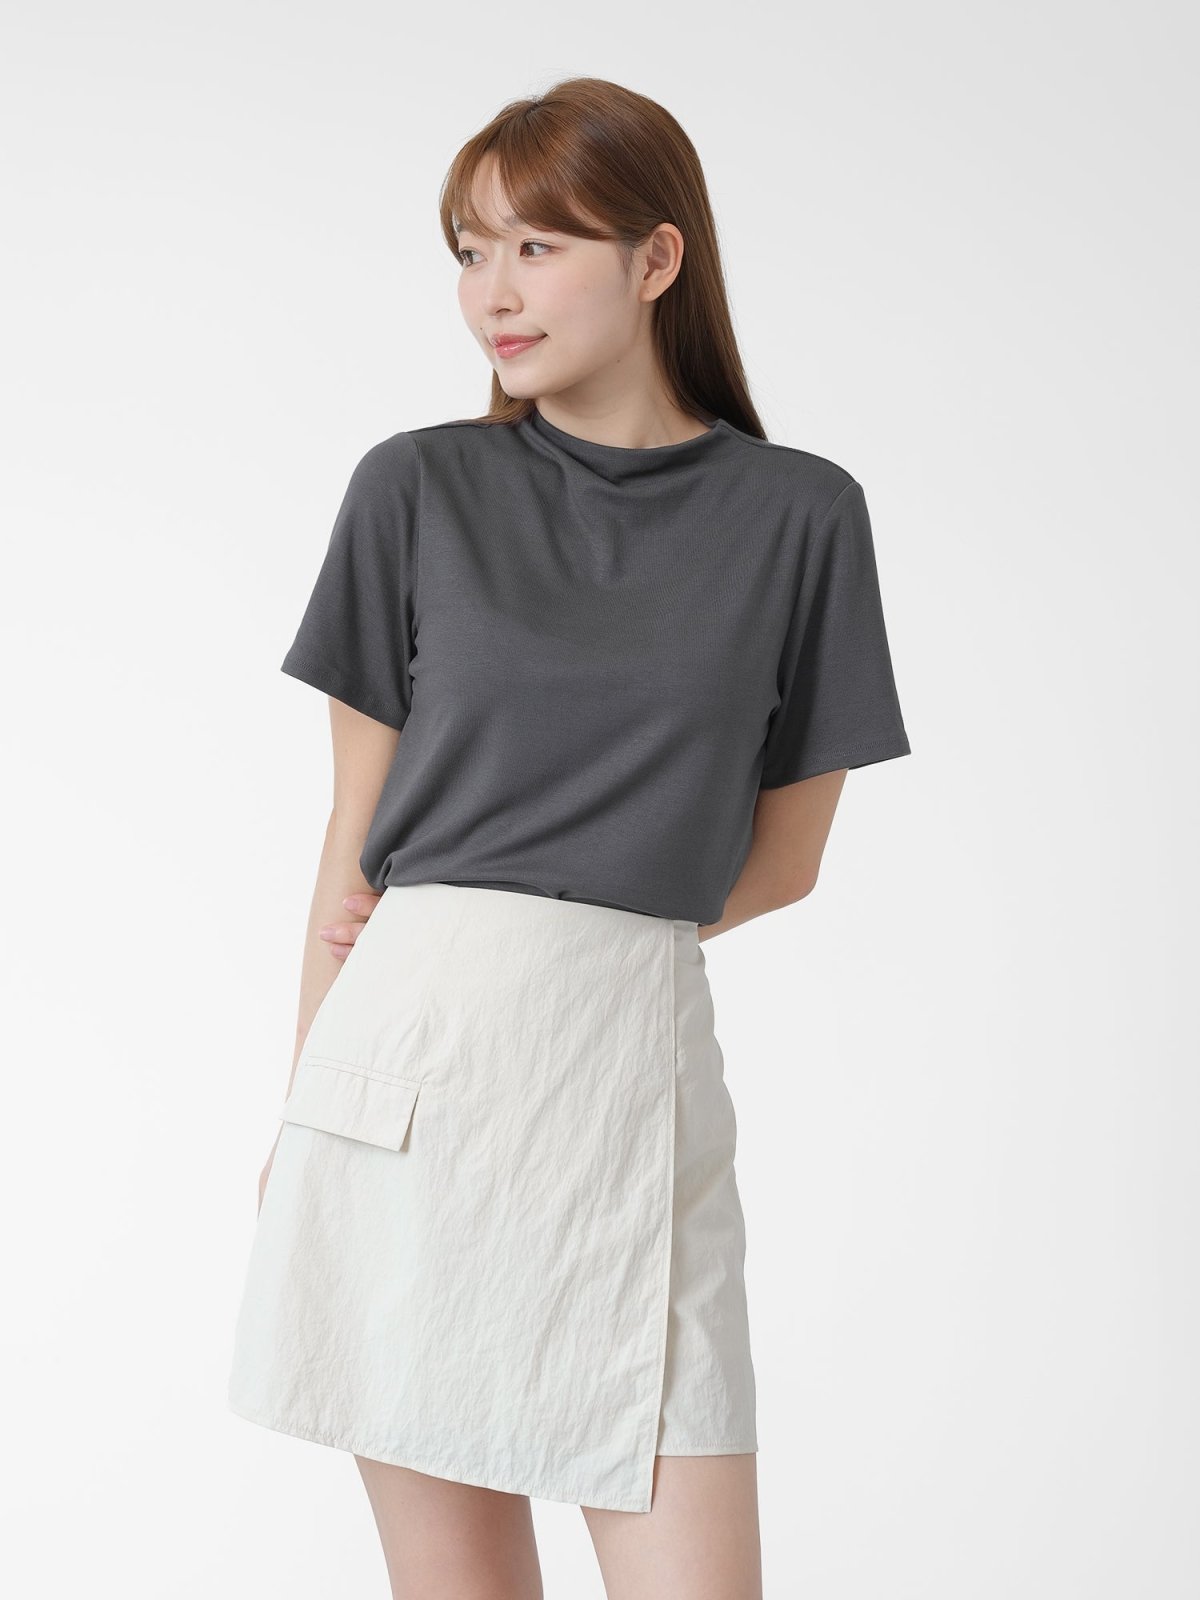 Merlo Funnel Neck Short Sleeve Top - DAG-DD1441-24CHARCOALS - Charcoal - S - D'zage Designs